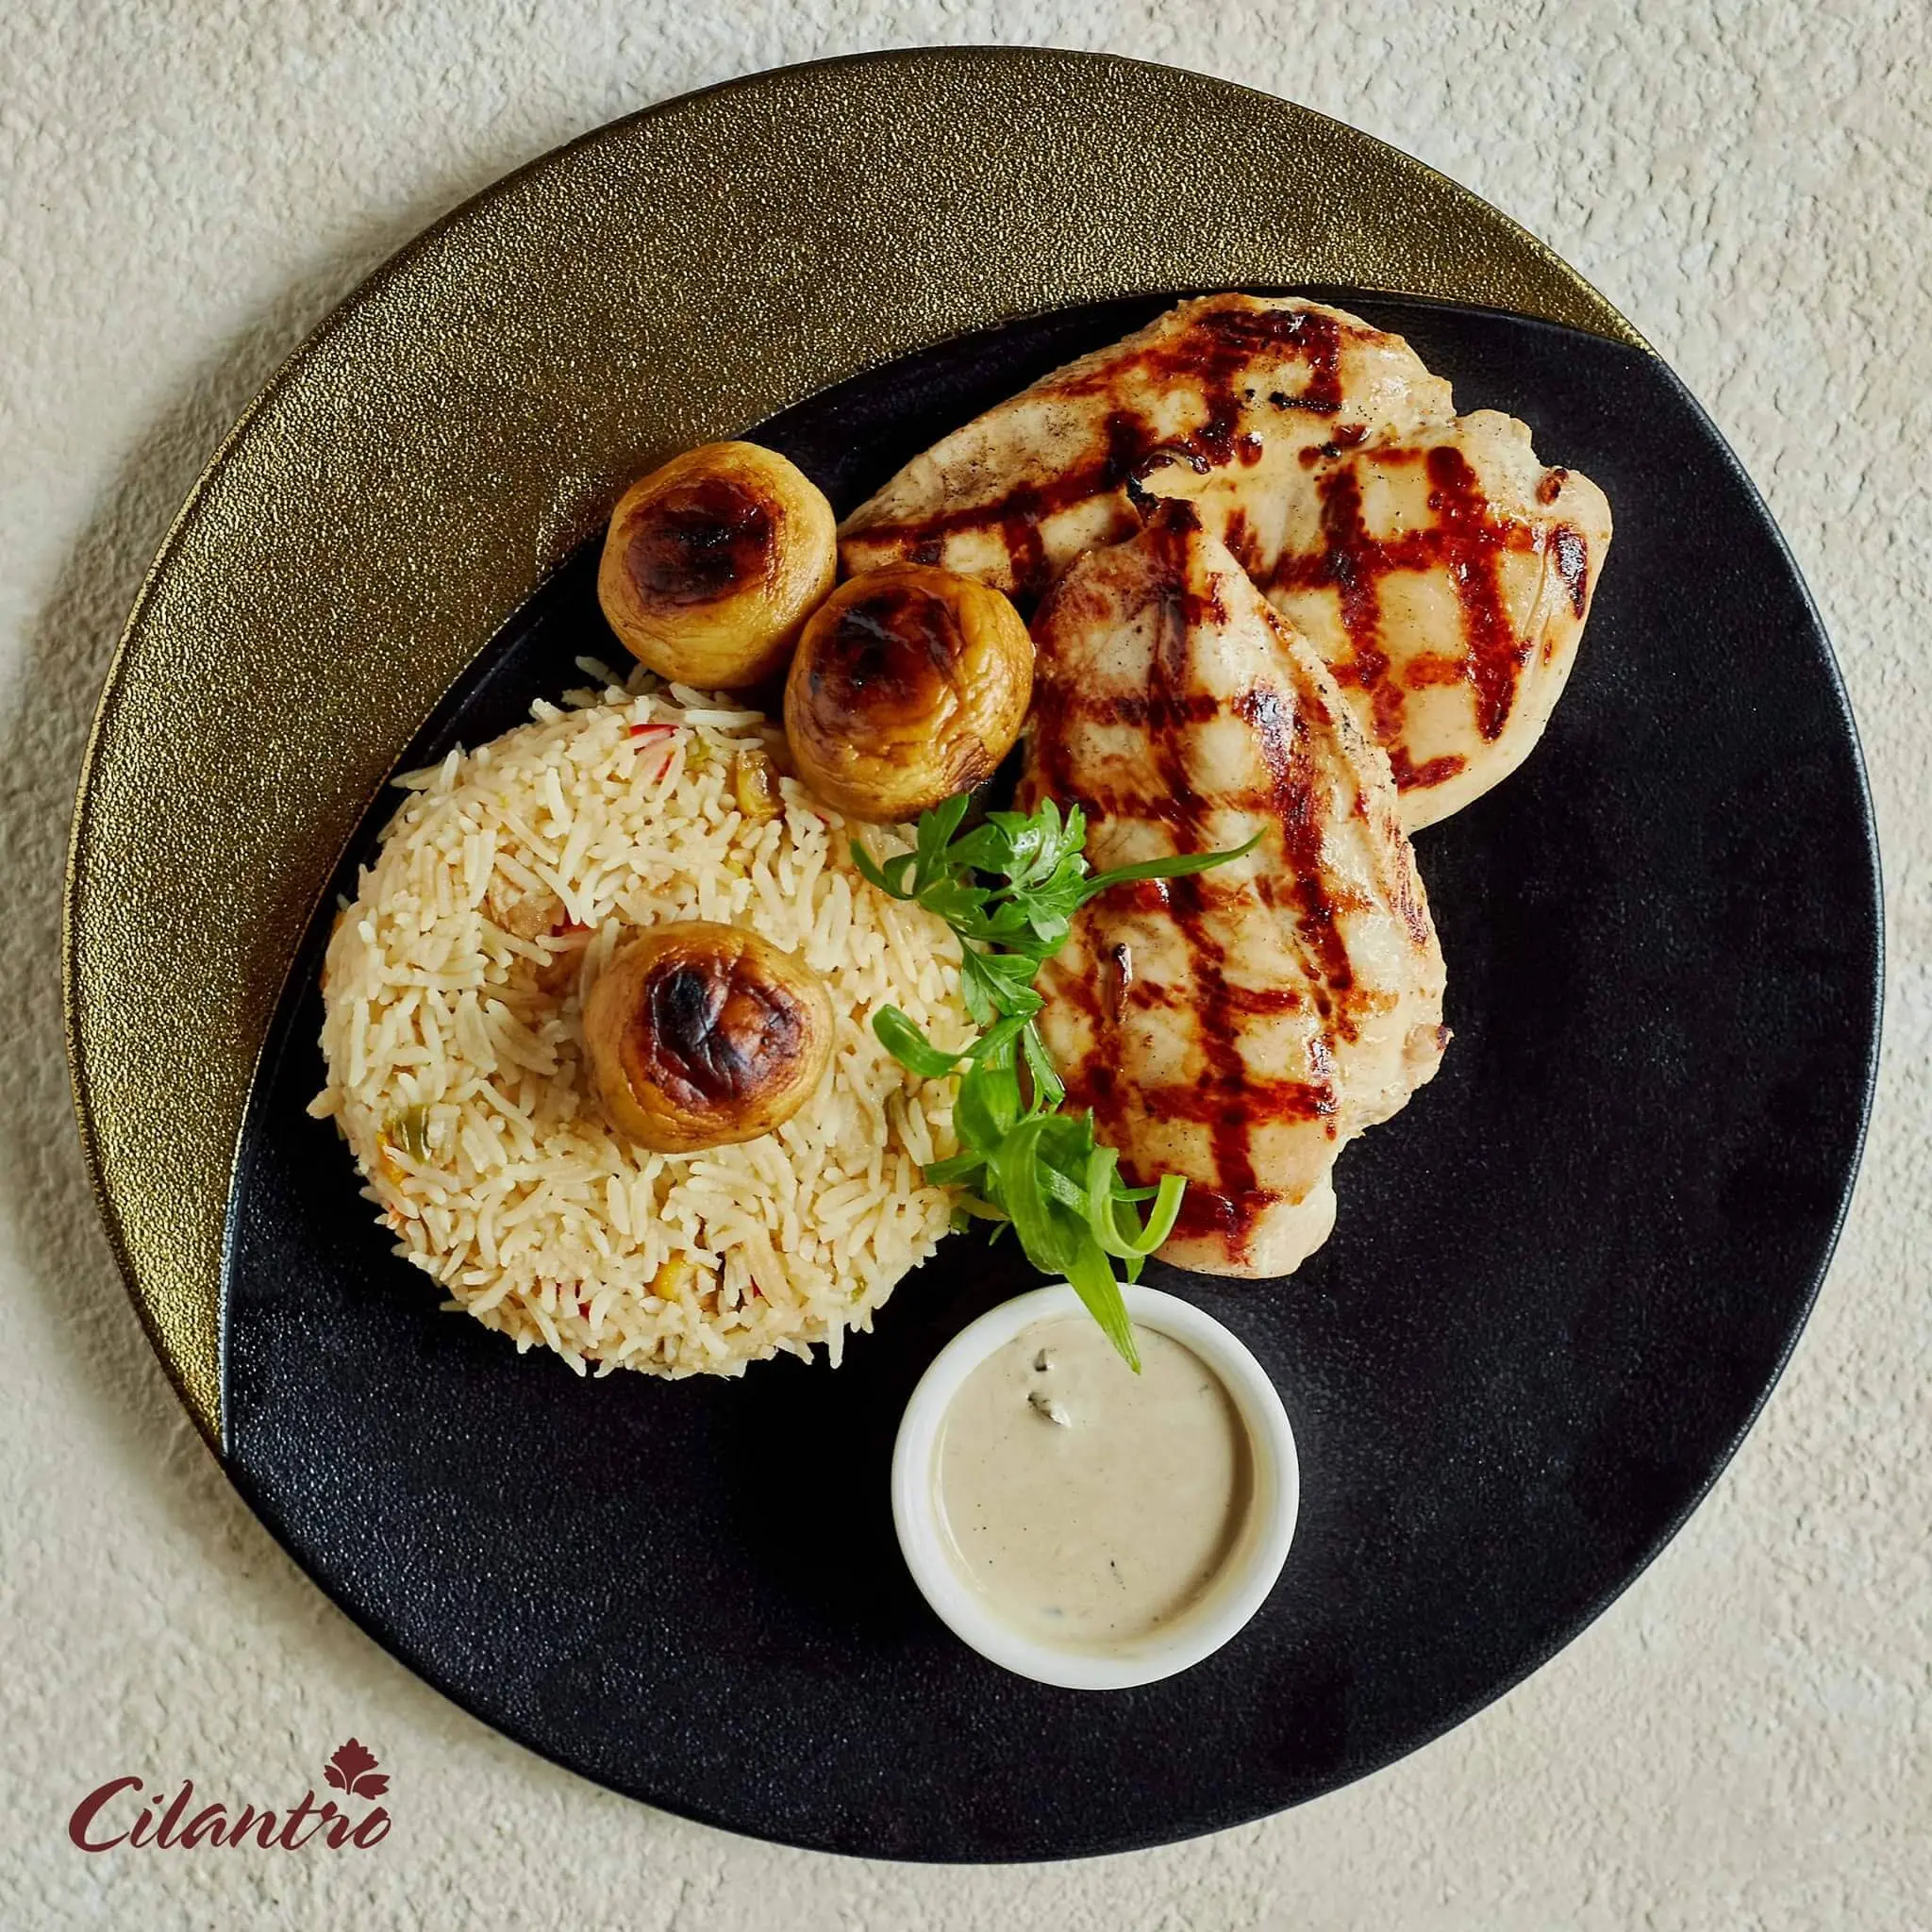 Grilled Chicken and Mushroom with Rice plate